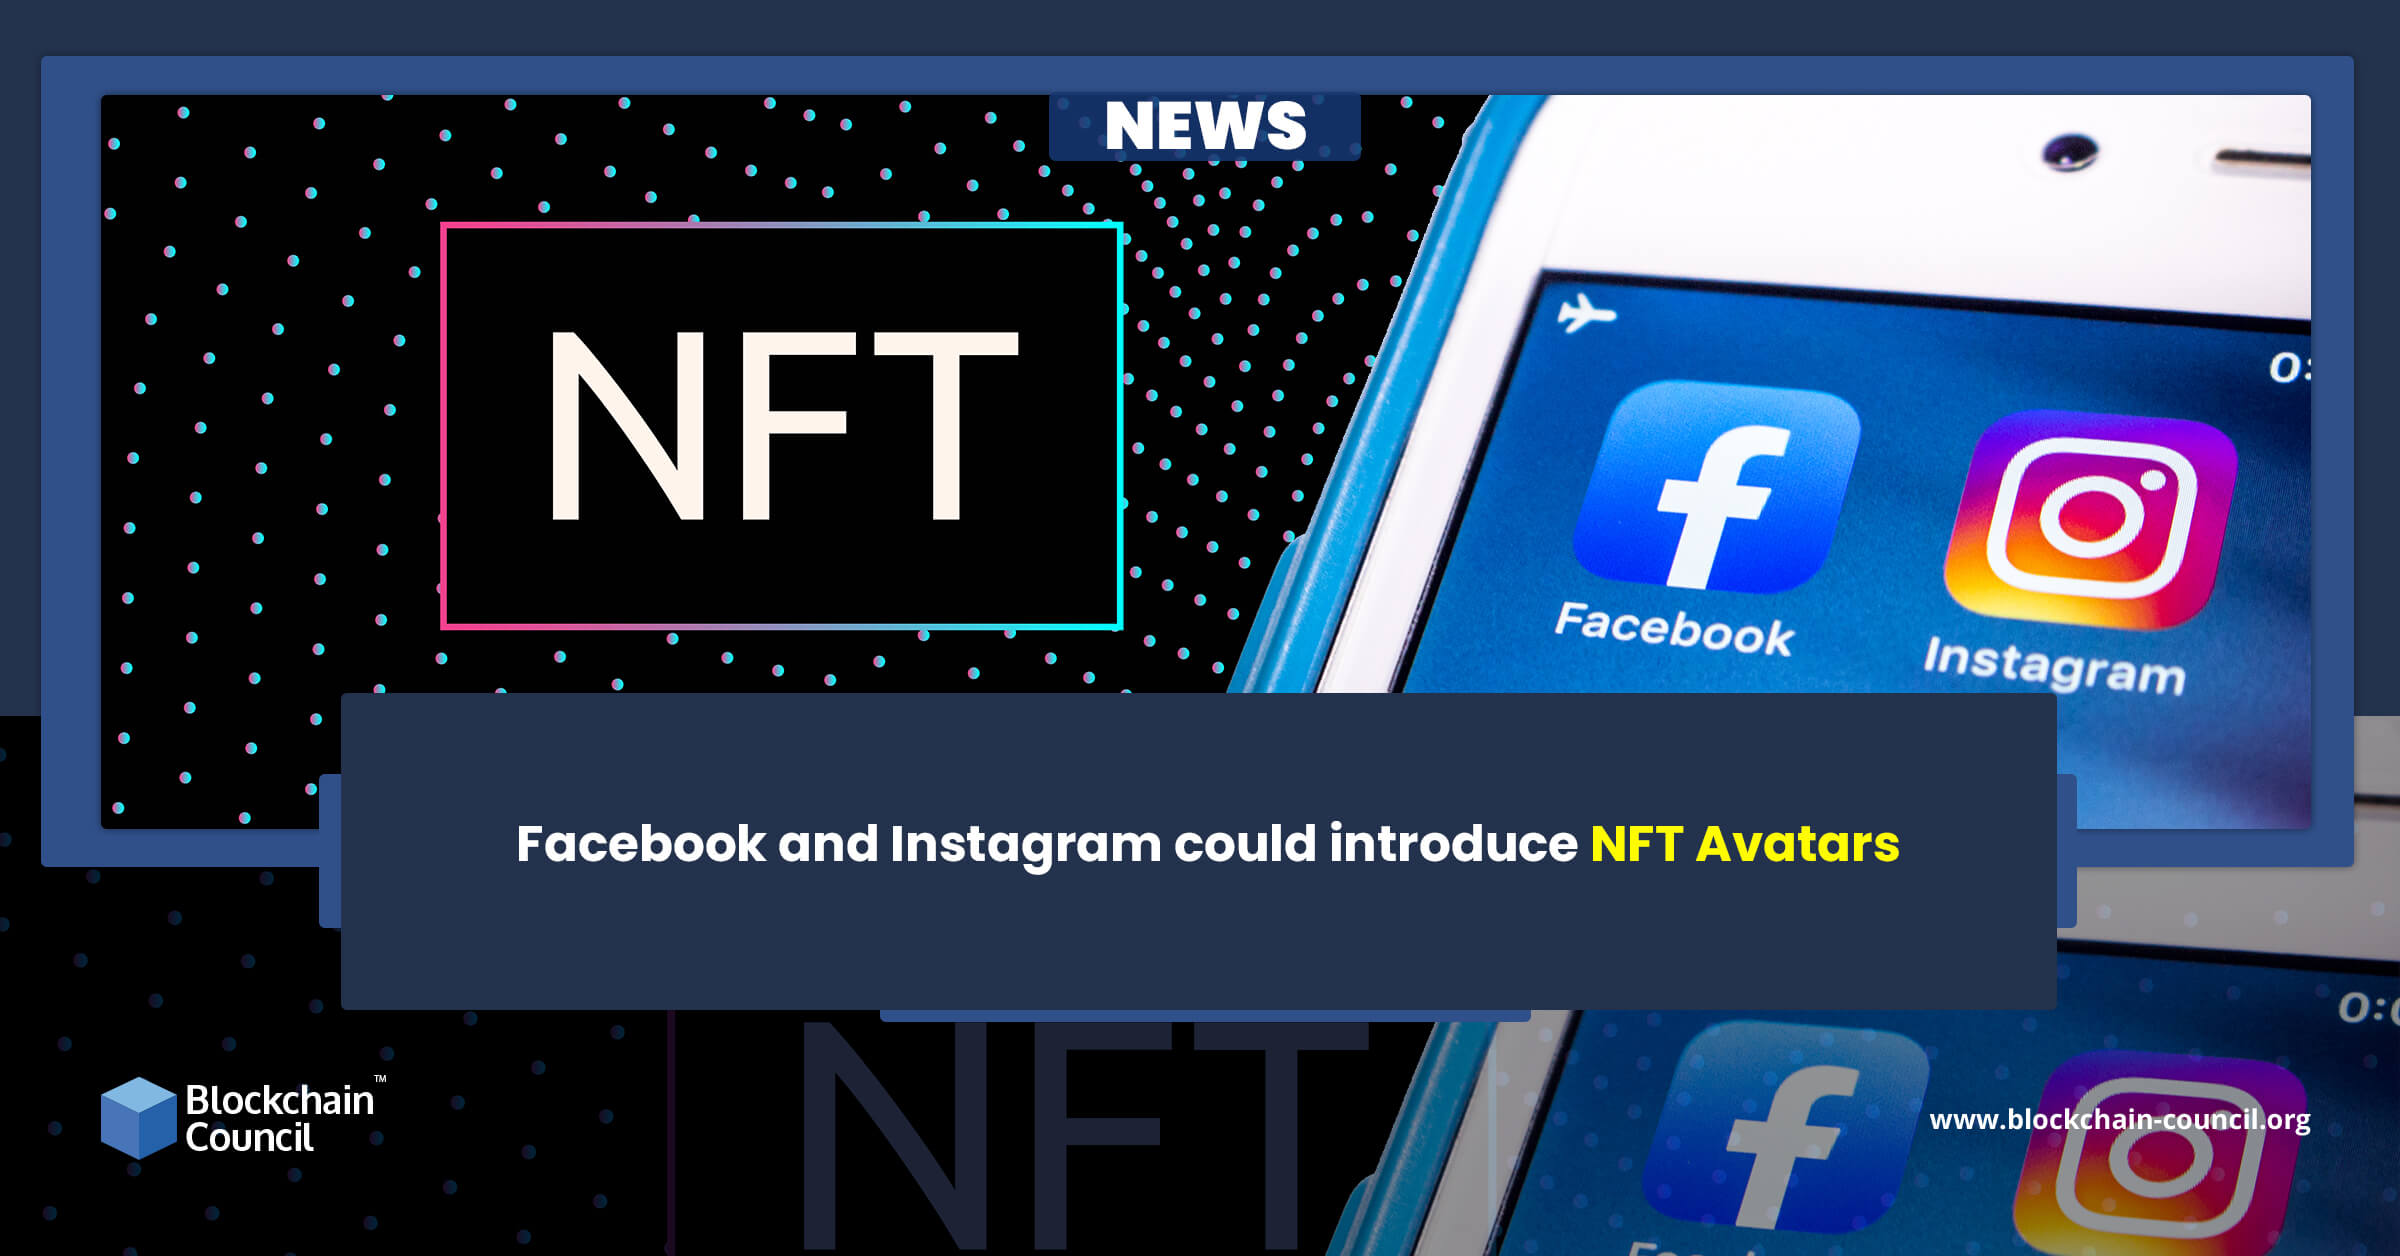 Facebook and Instagram could introduce NFT Avatars news